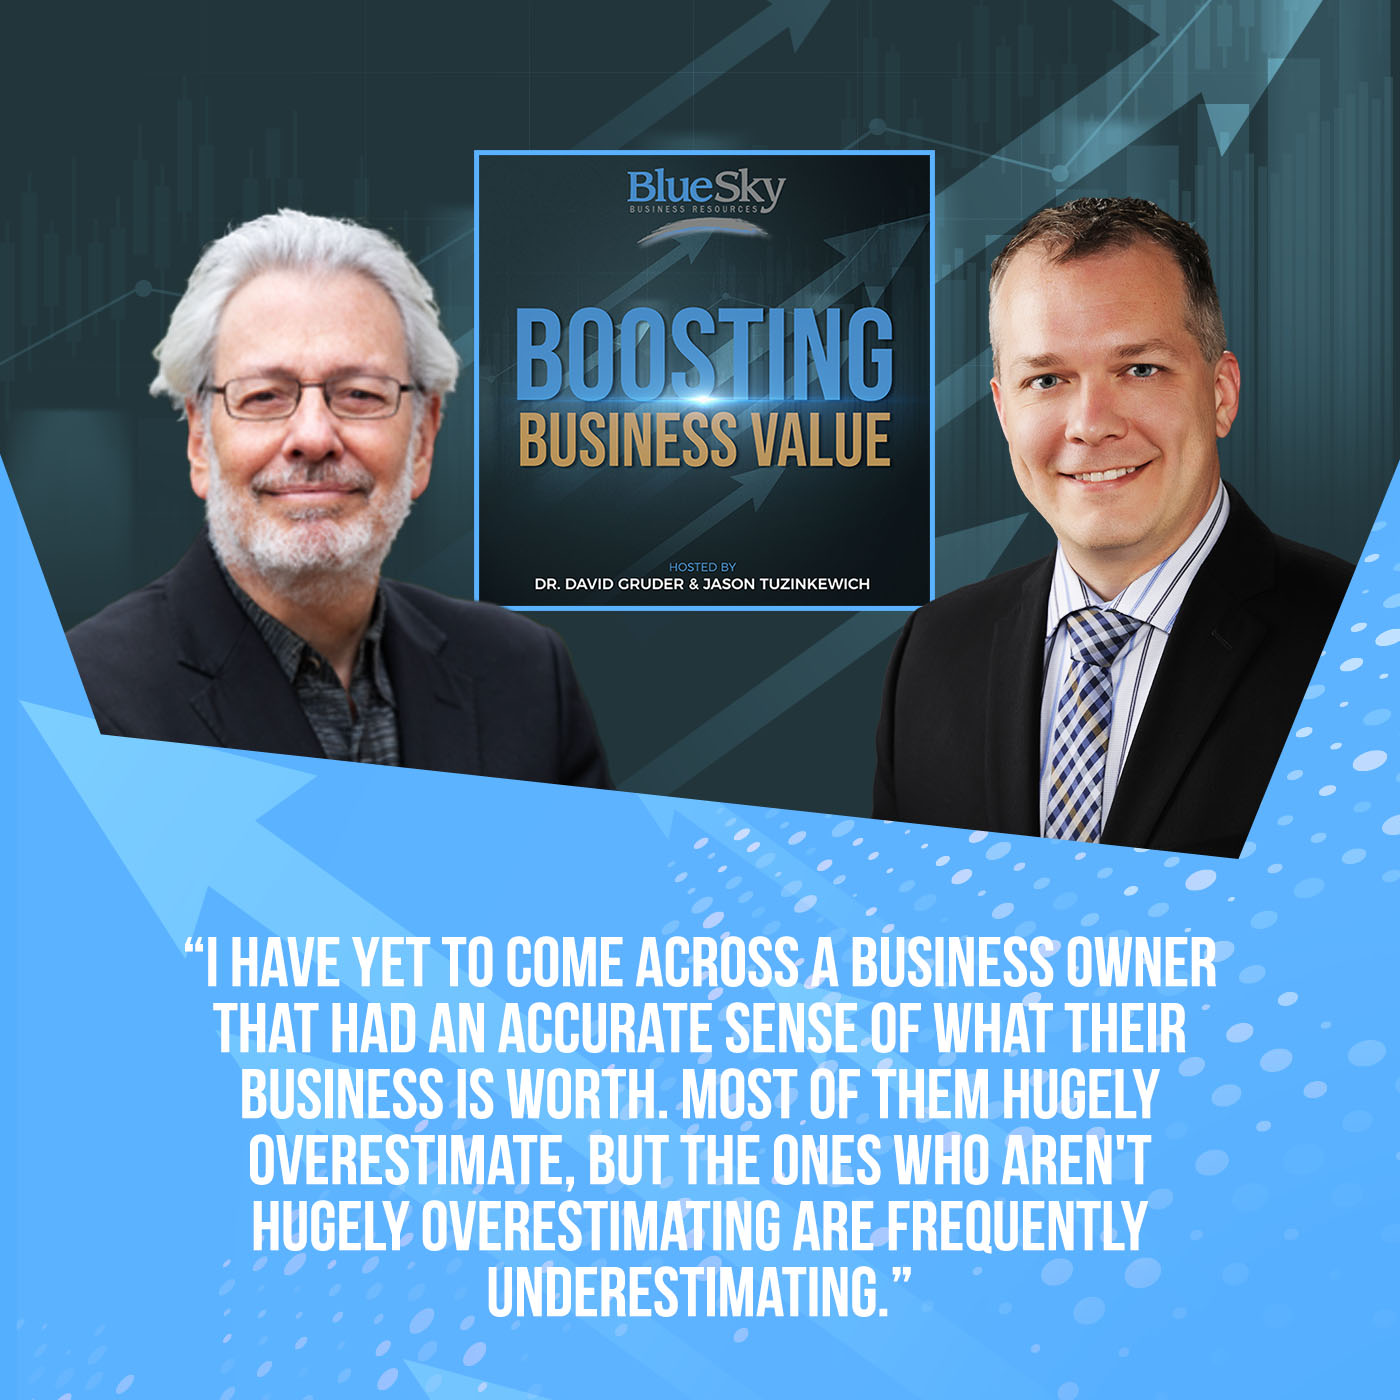 BBV 2 | Selling Your Business